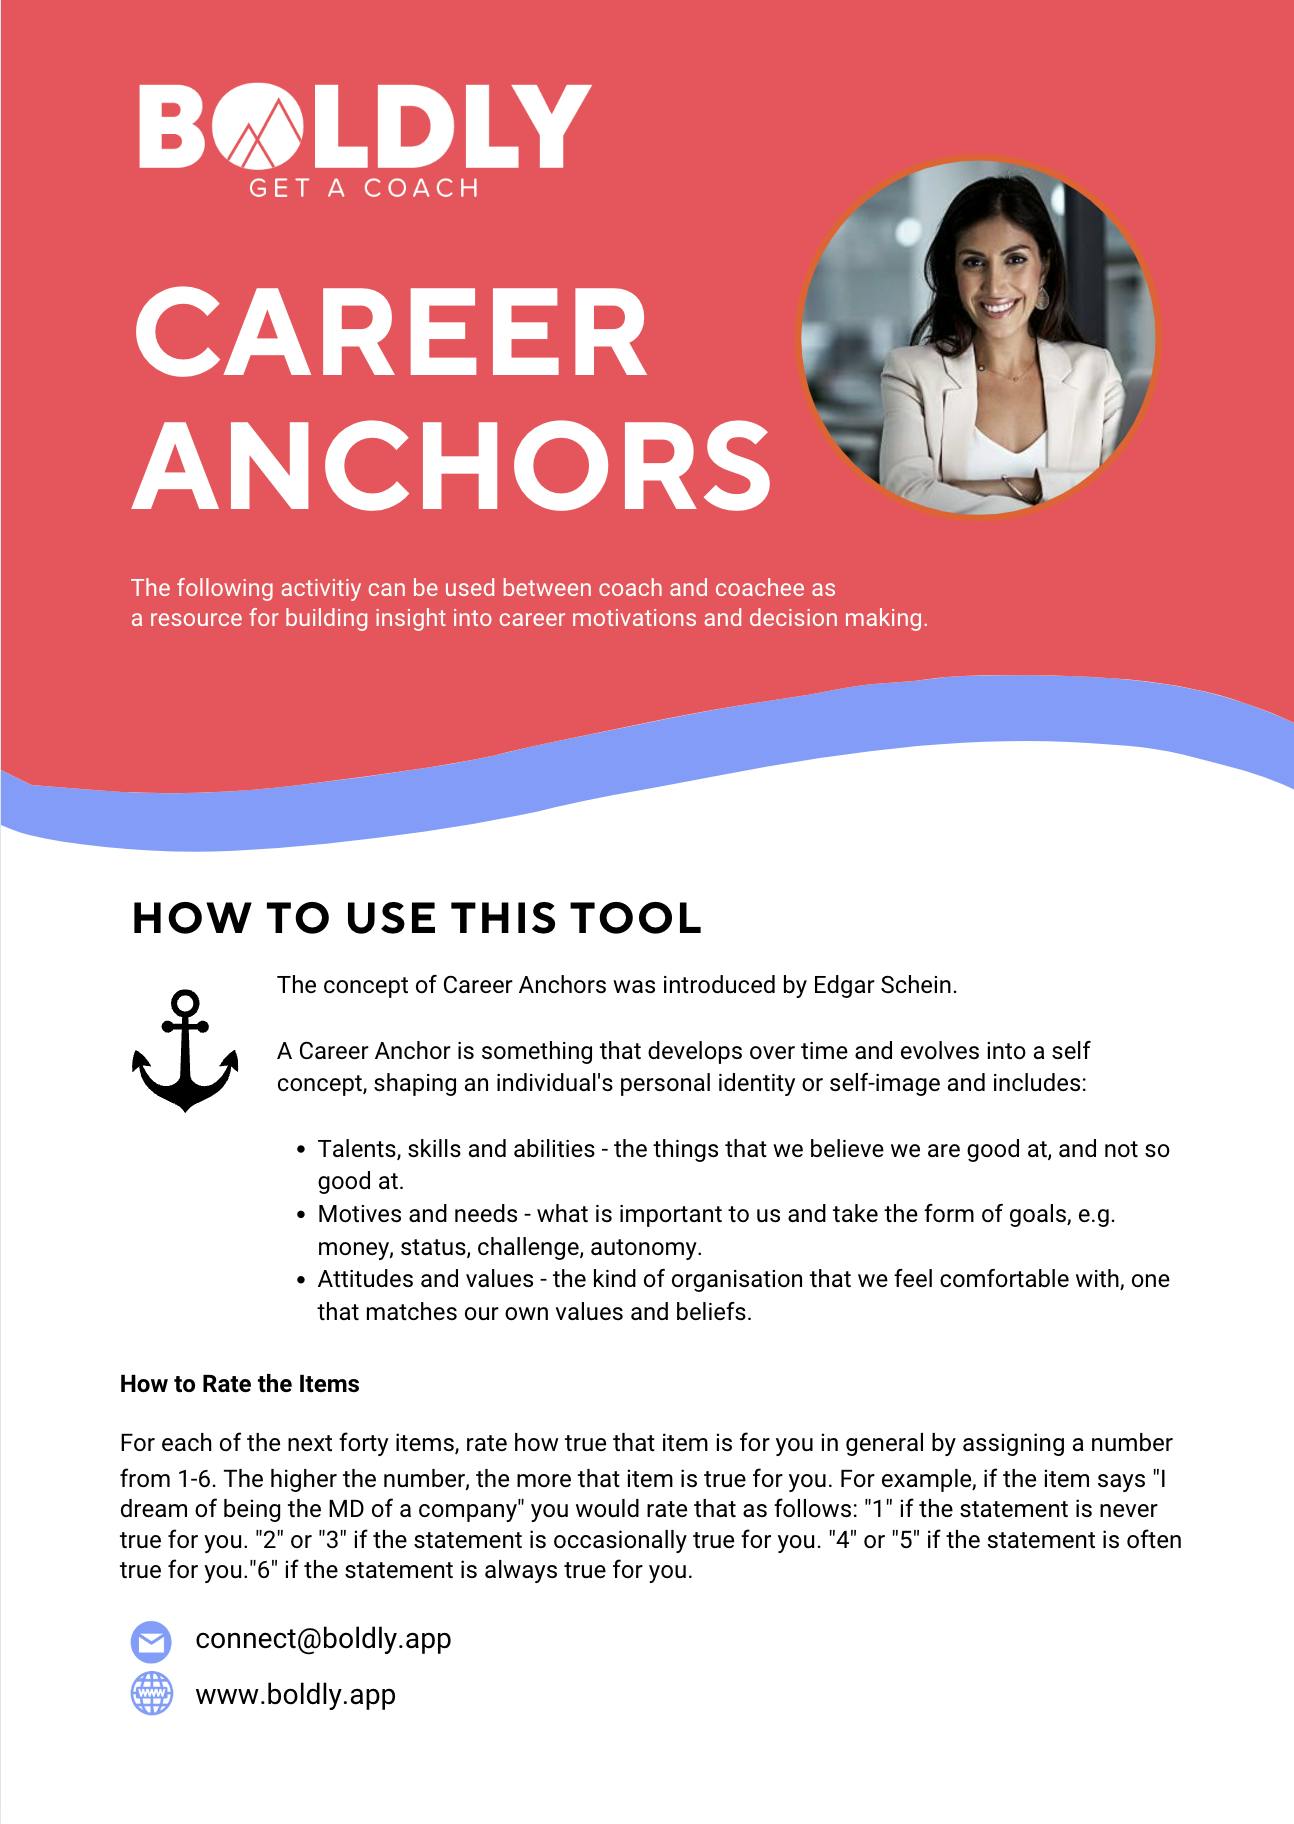 Tool to help build career anchors